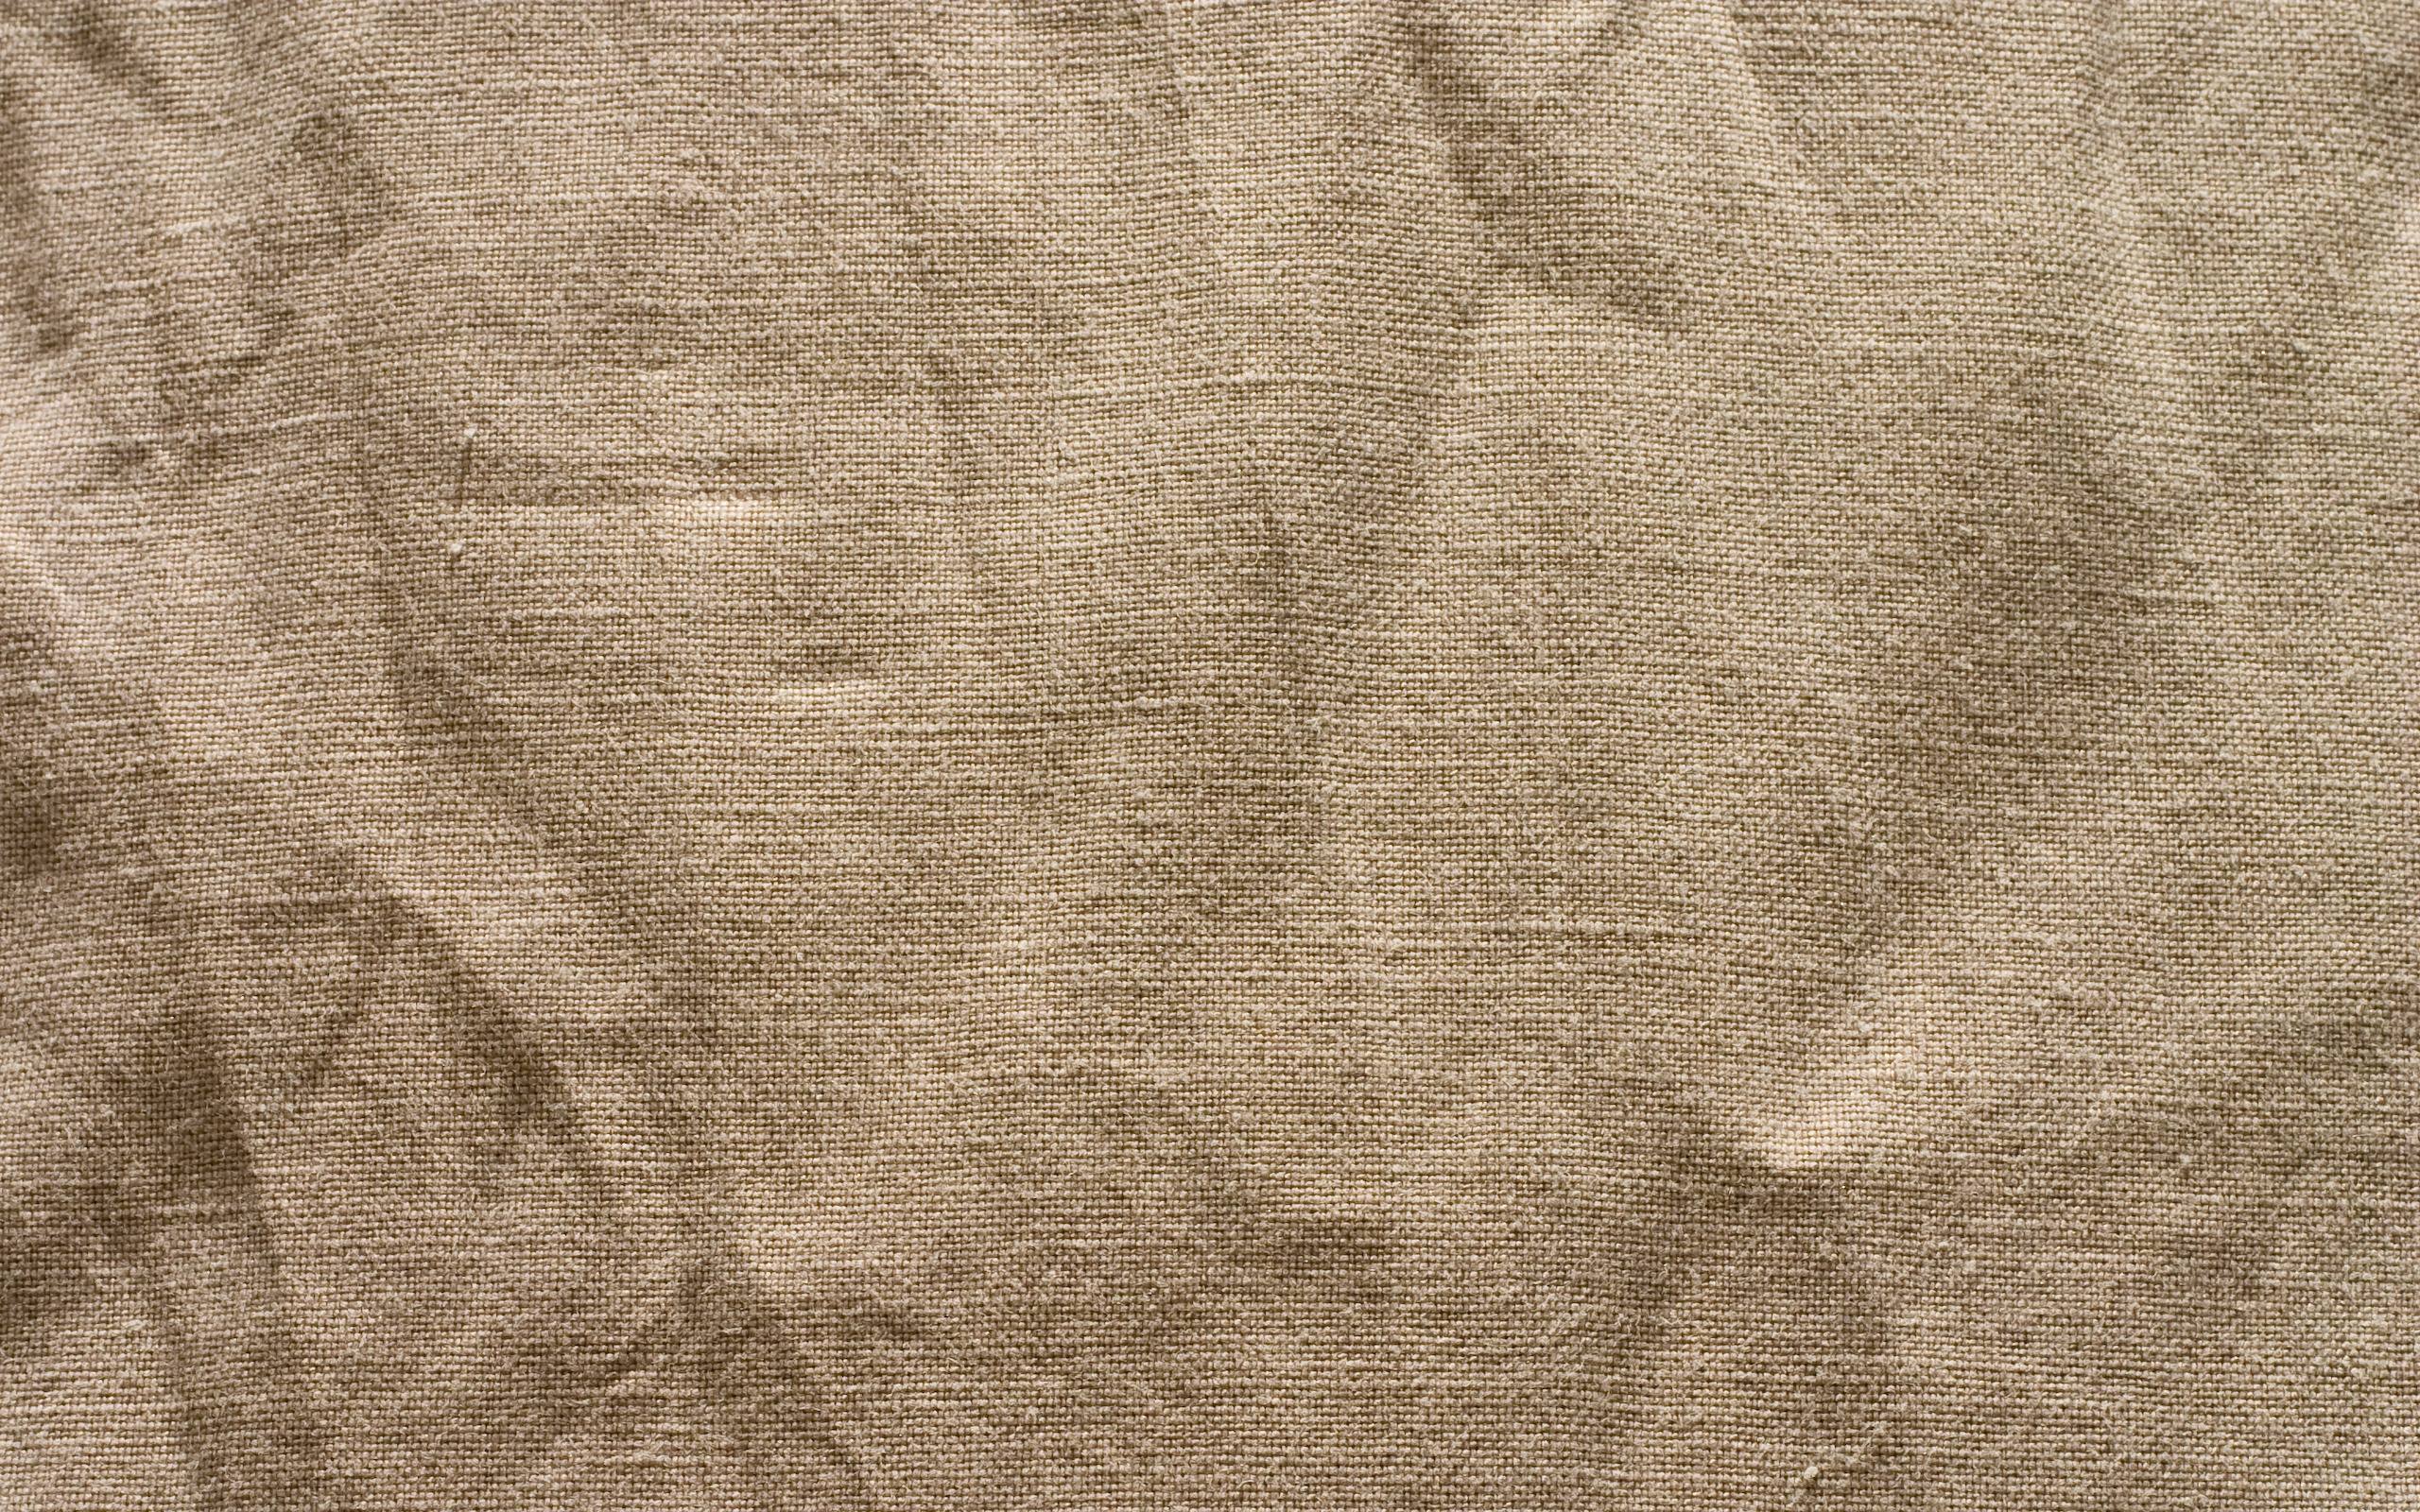 Free photo: Old fabric texture - Damaged, Dirty, Fabric ...